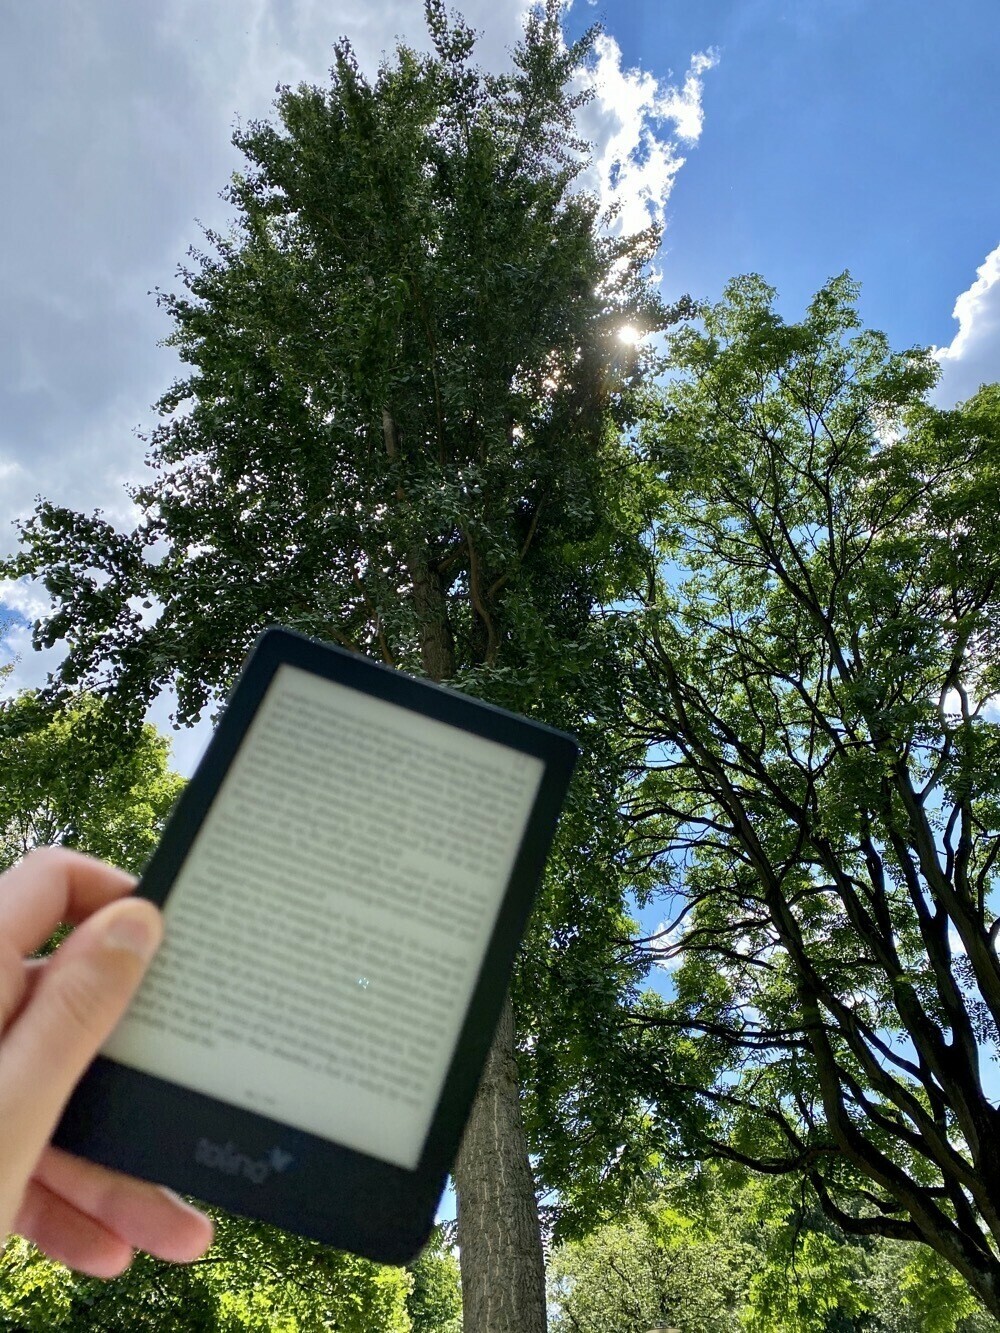 An E-reader with the sun behind the trees